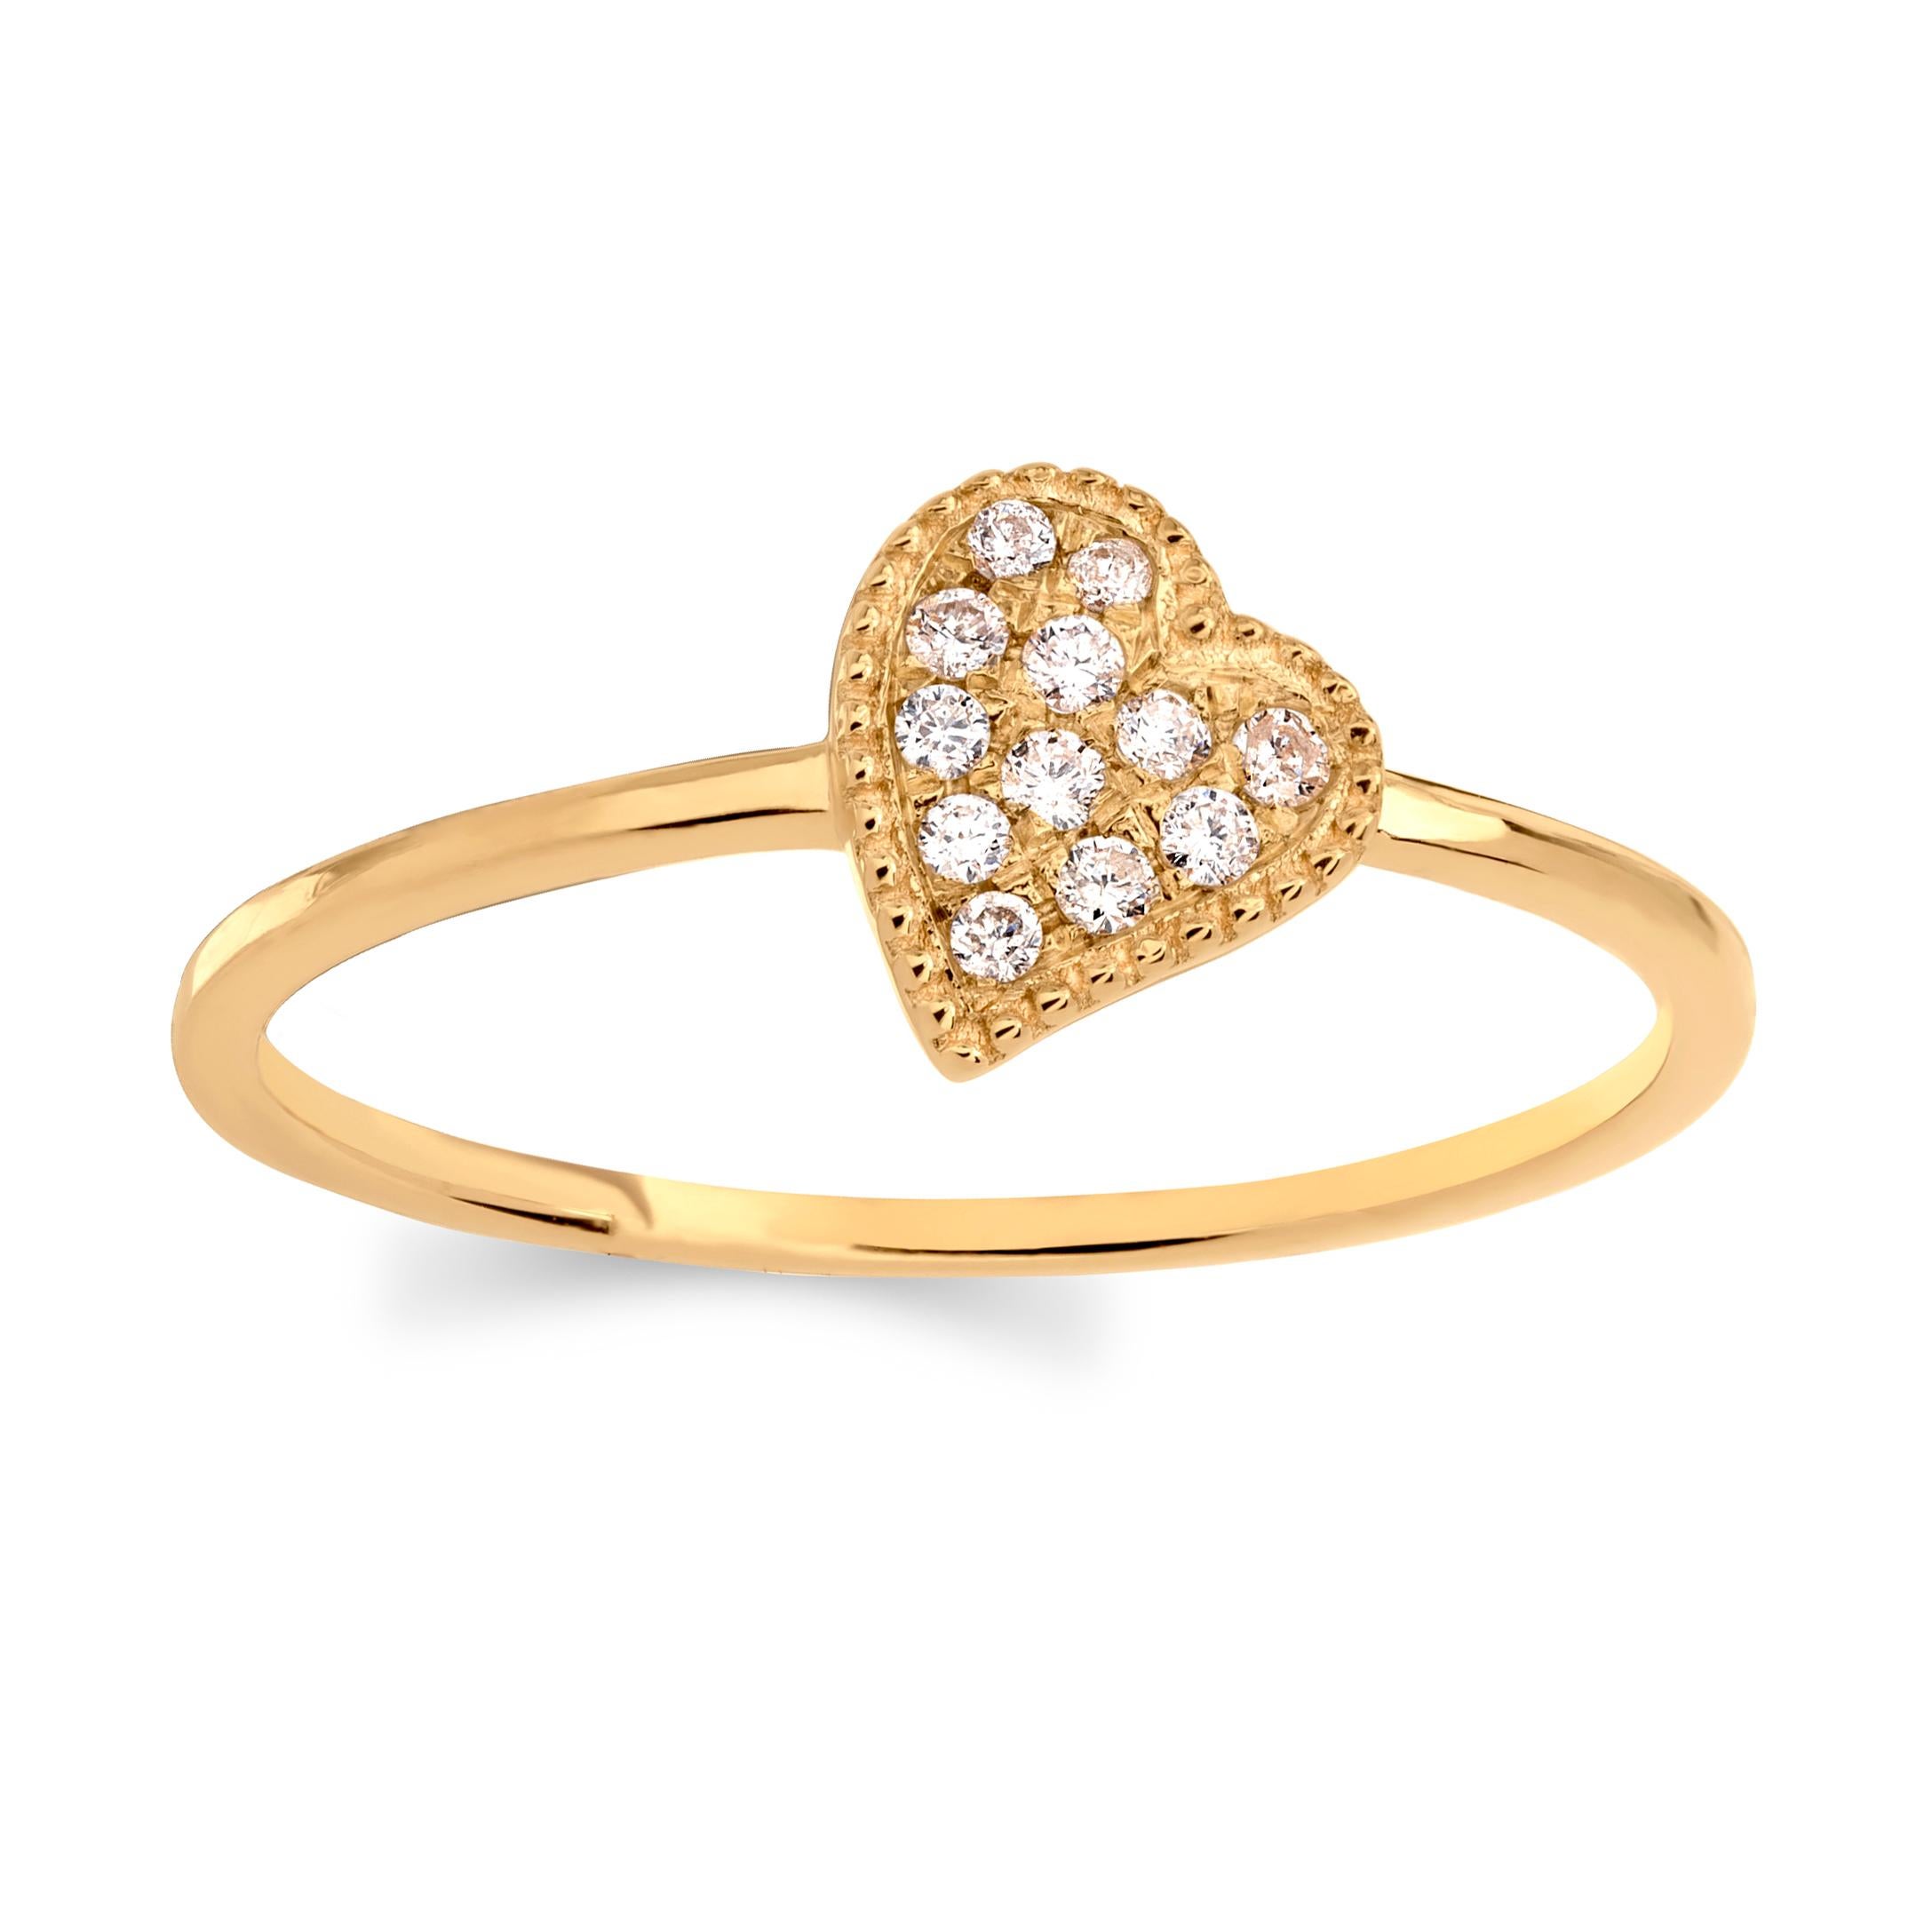 Grace your finger with a Luxle heart ring symbolizes attraction, affection, cohesion, unity, femininity, and sensuality. Subtle yet pretty this heart ring is the new fashion statement. This ring is featured with 12 round cut diamonds, totaling